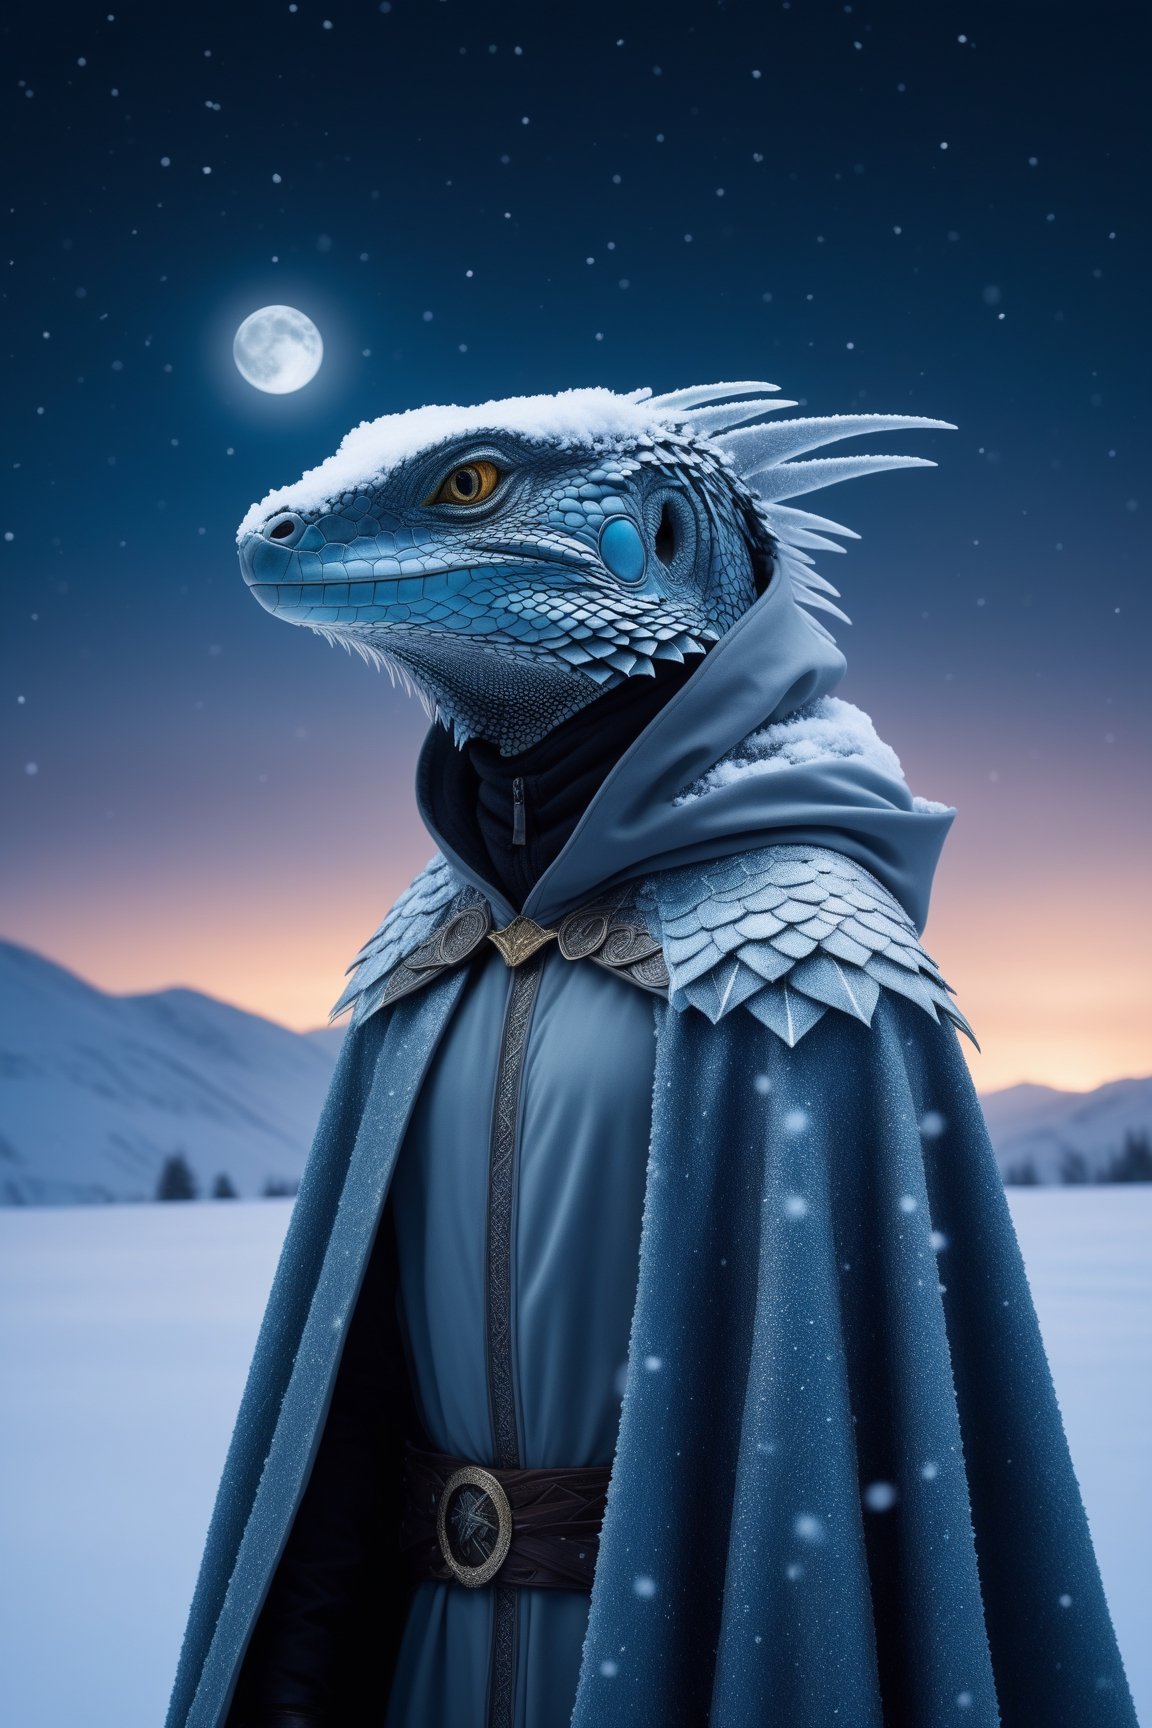 A visually striking image of a hybrid reptile and human, anthropomorphic in a snowy background, seamlessly blending scales and skin with piercing eyes that reflect the soul of both worlds. This creature stands majestically, draped in a cloak made of woven frost, its breath visible in the cold air, surrounded by a pristine, untouched snowscape that sparkles under the moonlight. The scene is imbued with a sense of mystery and awe, captured through the lens of a Nikon D850 at a low angle to emphasize the imposing stature of the hybrid against the vast, silent winter night. The composition focuses on the fusion of natural and fantastical elements, suggesting an untold story of survival and adaptation, with a setting that feels both alien and familiar --ar 4:5 --s 230